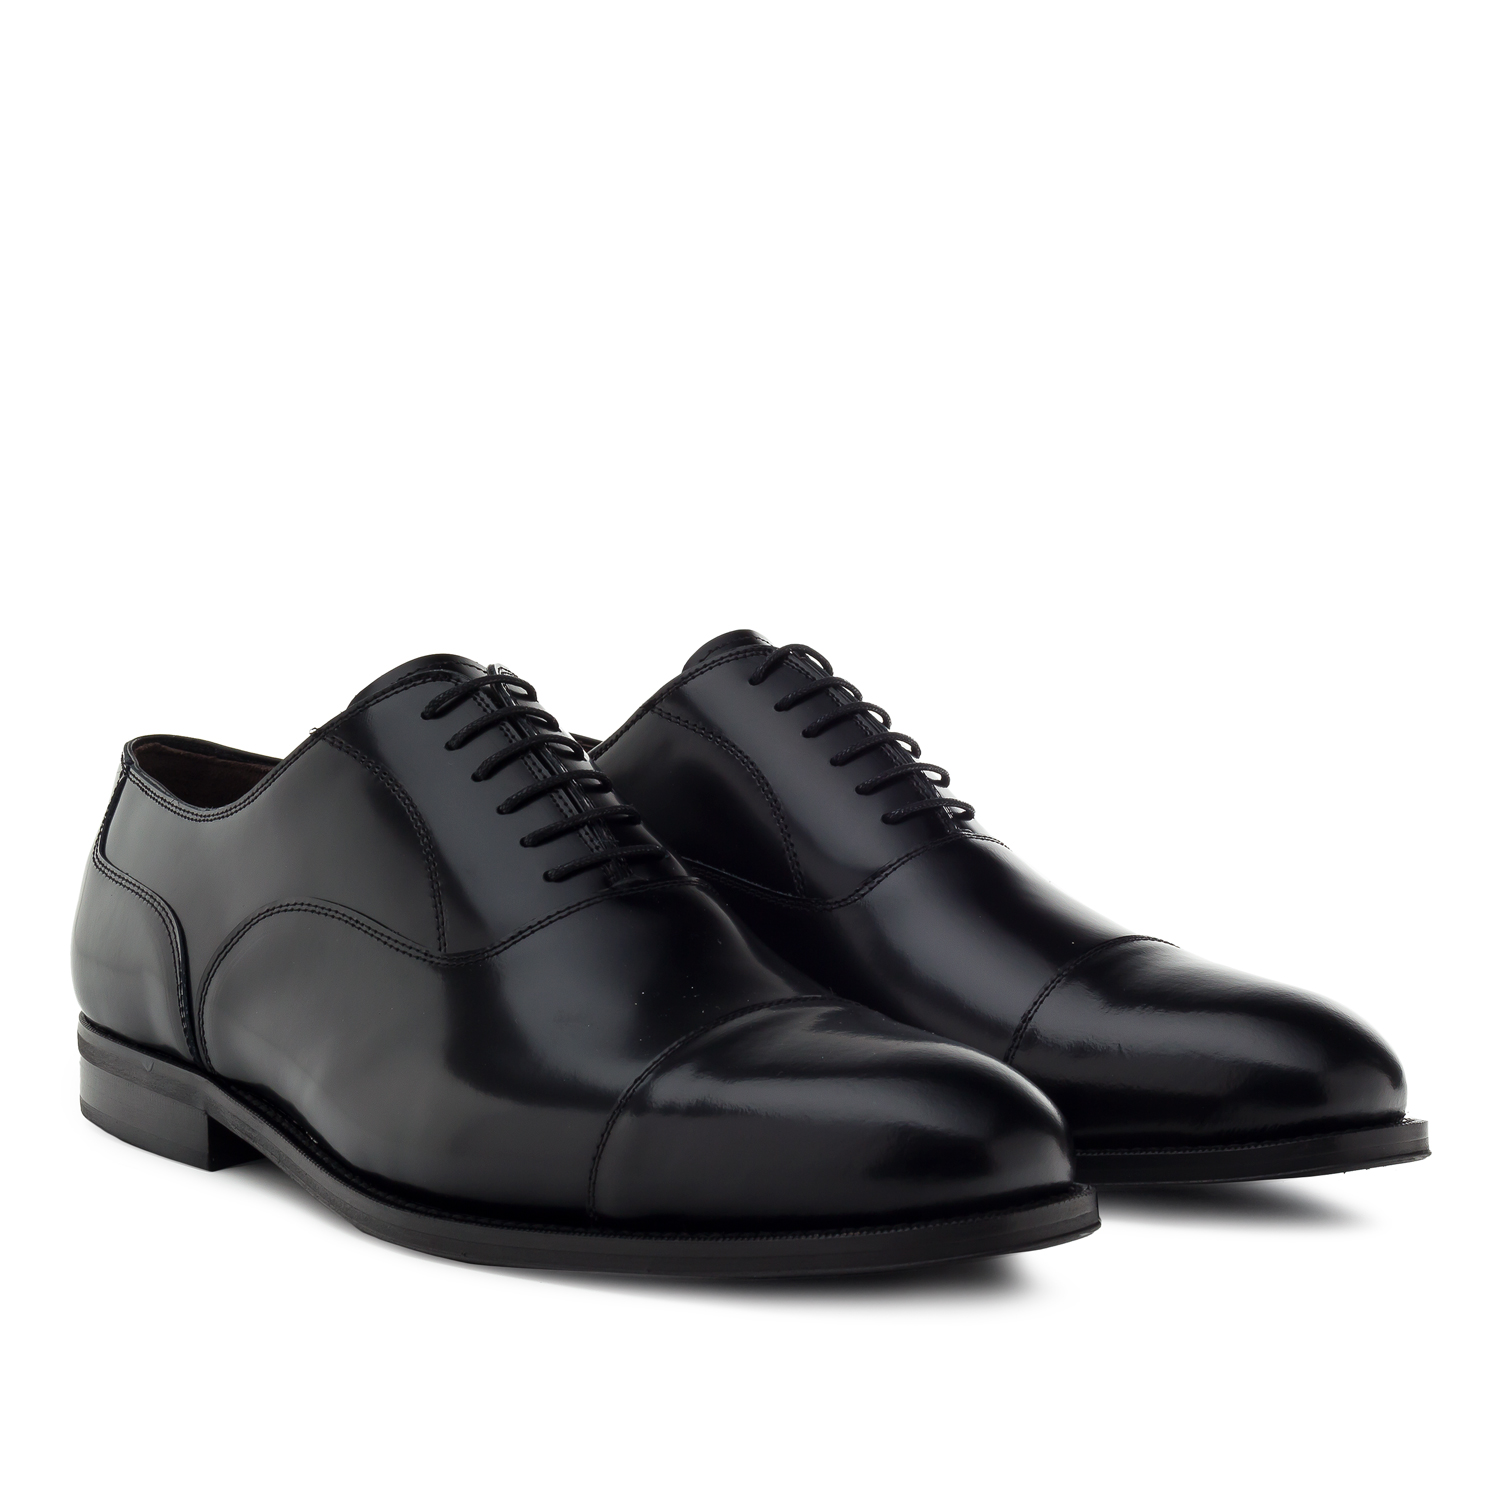 Oxford Shoes in Black Antik Leather 